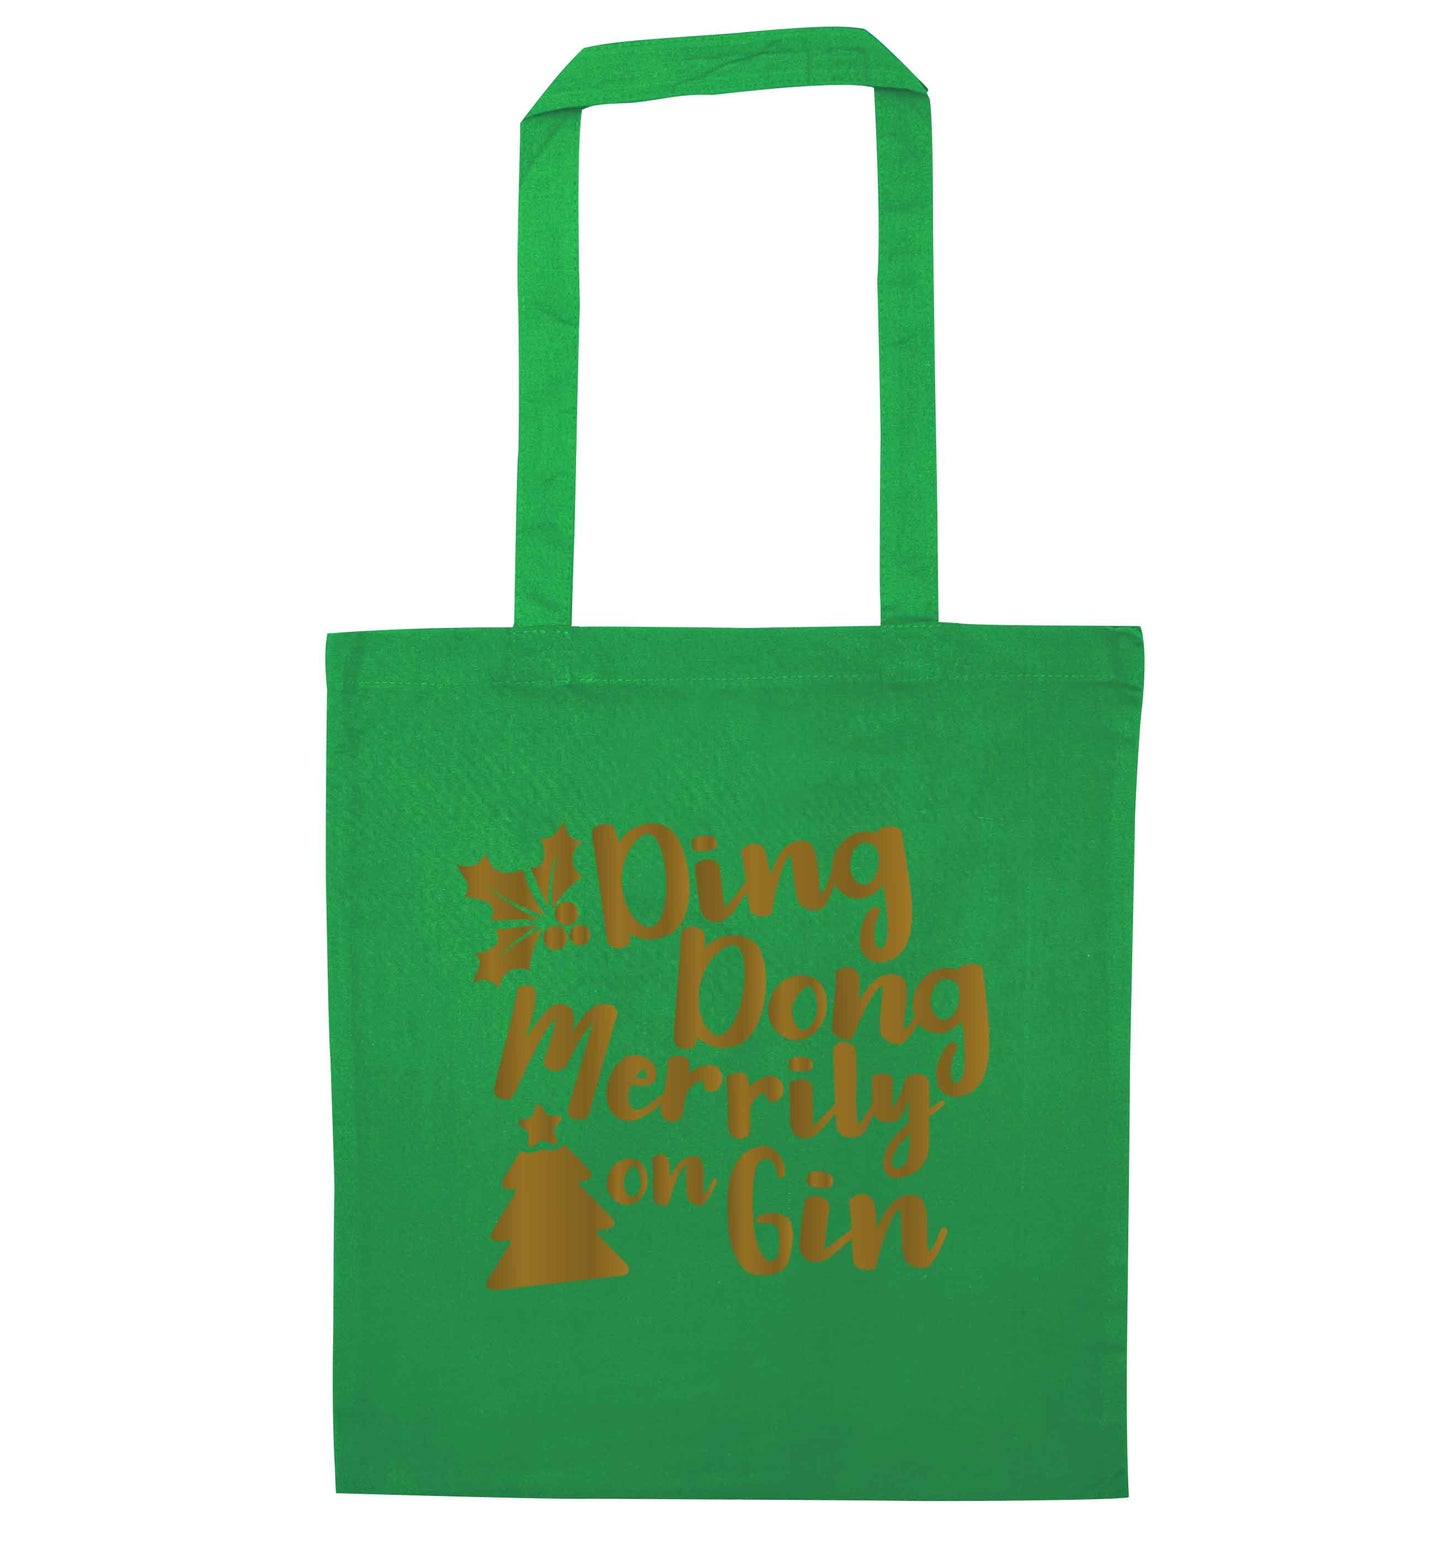 Ding dong merrily on gin green tote bag